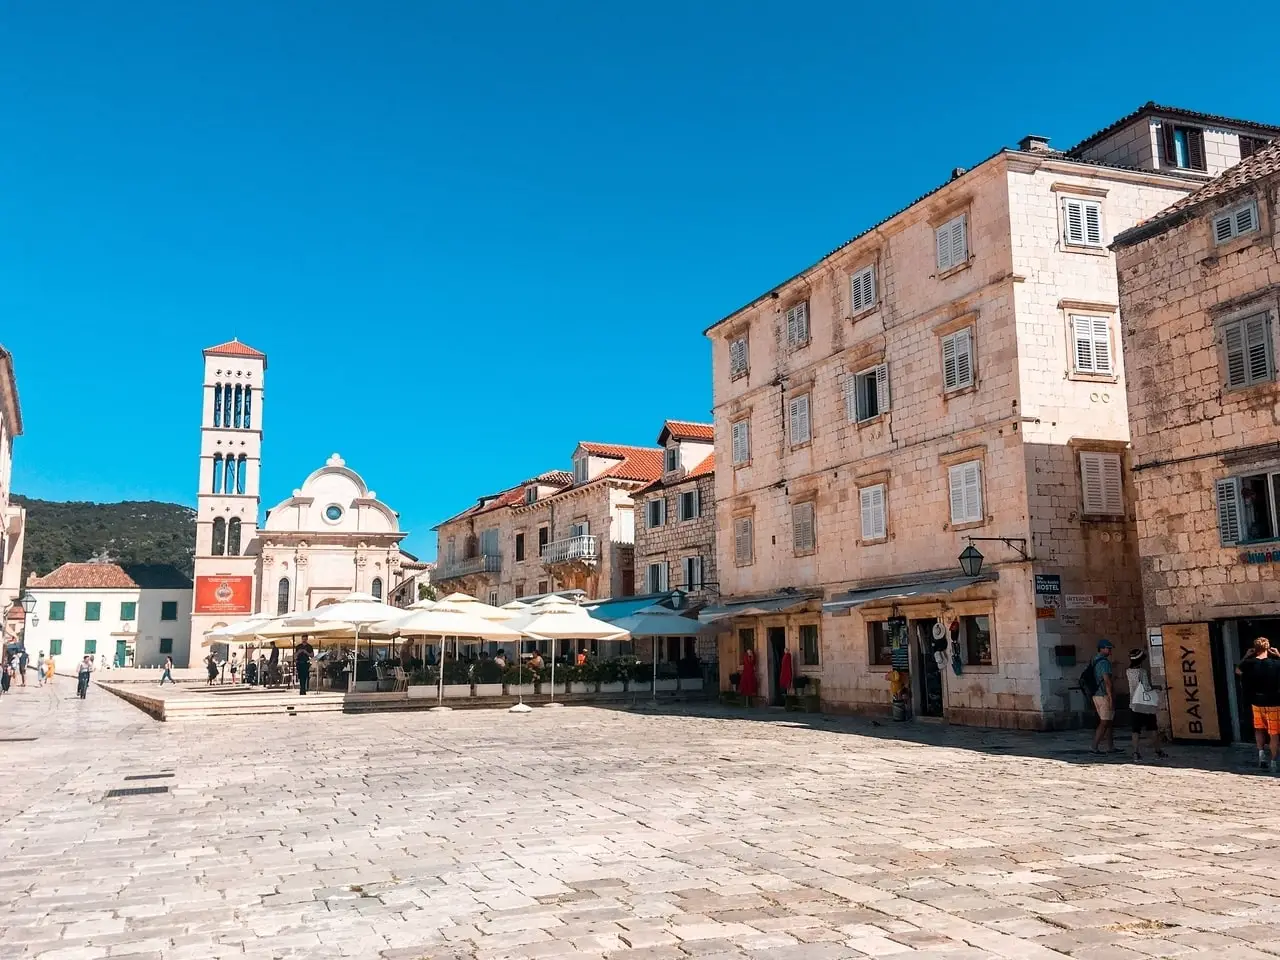 Town Square things to do in Hvar in 1 day.